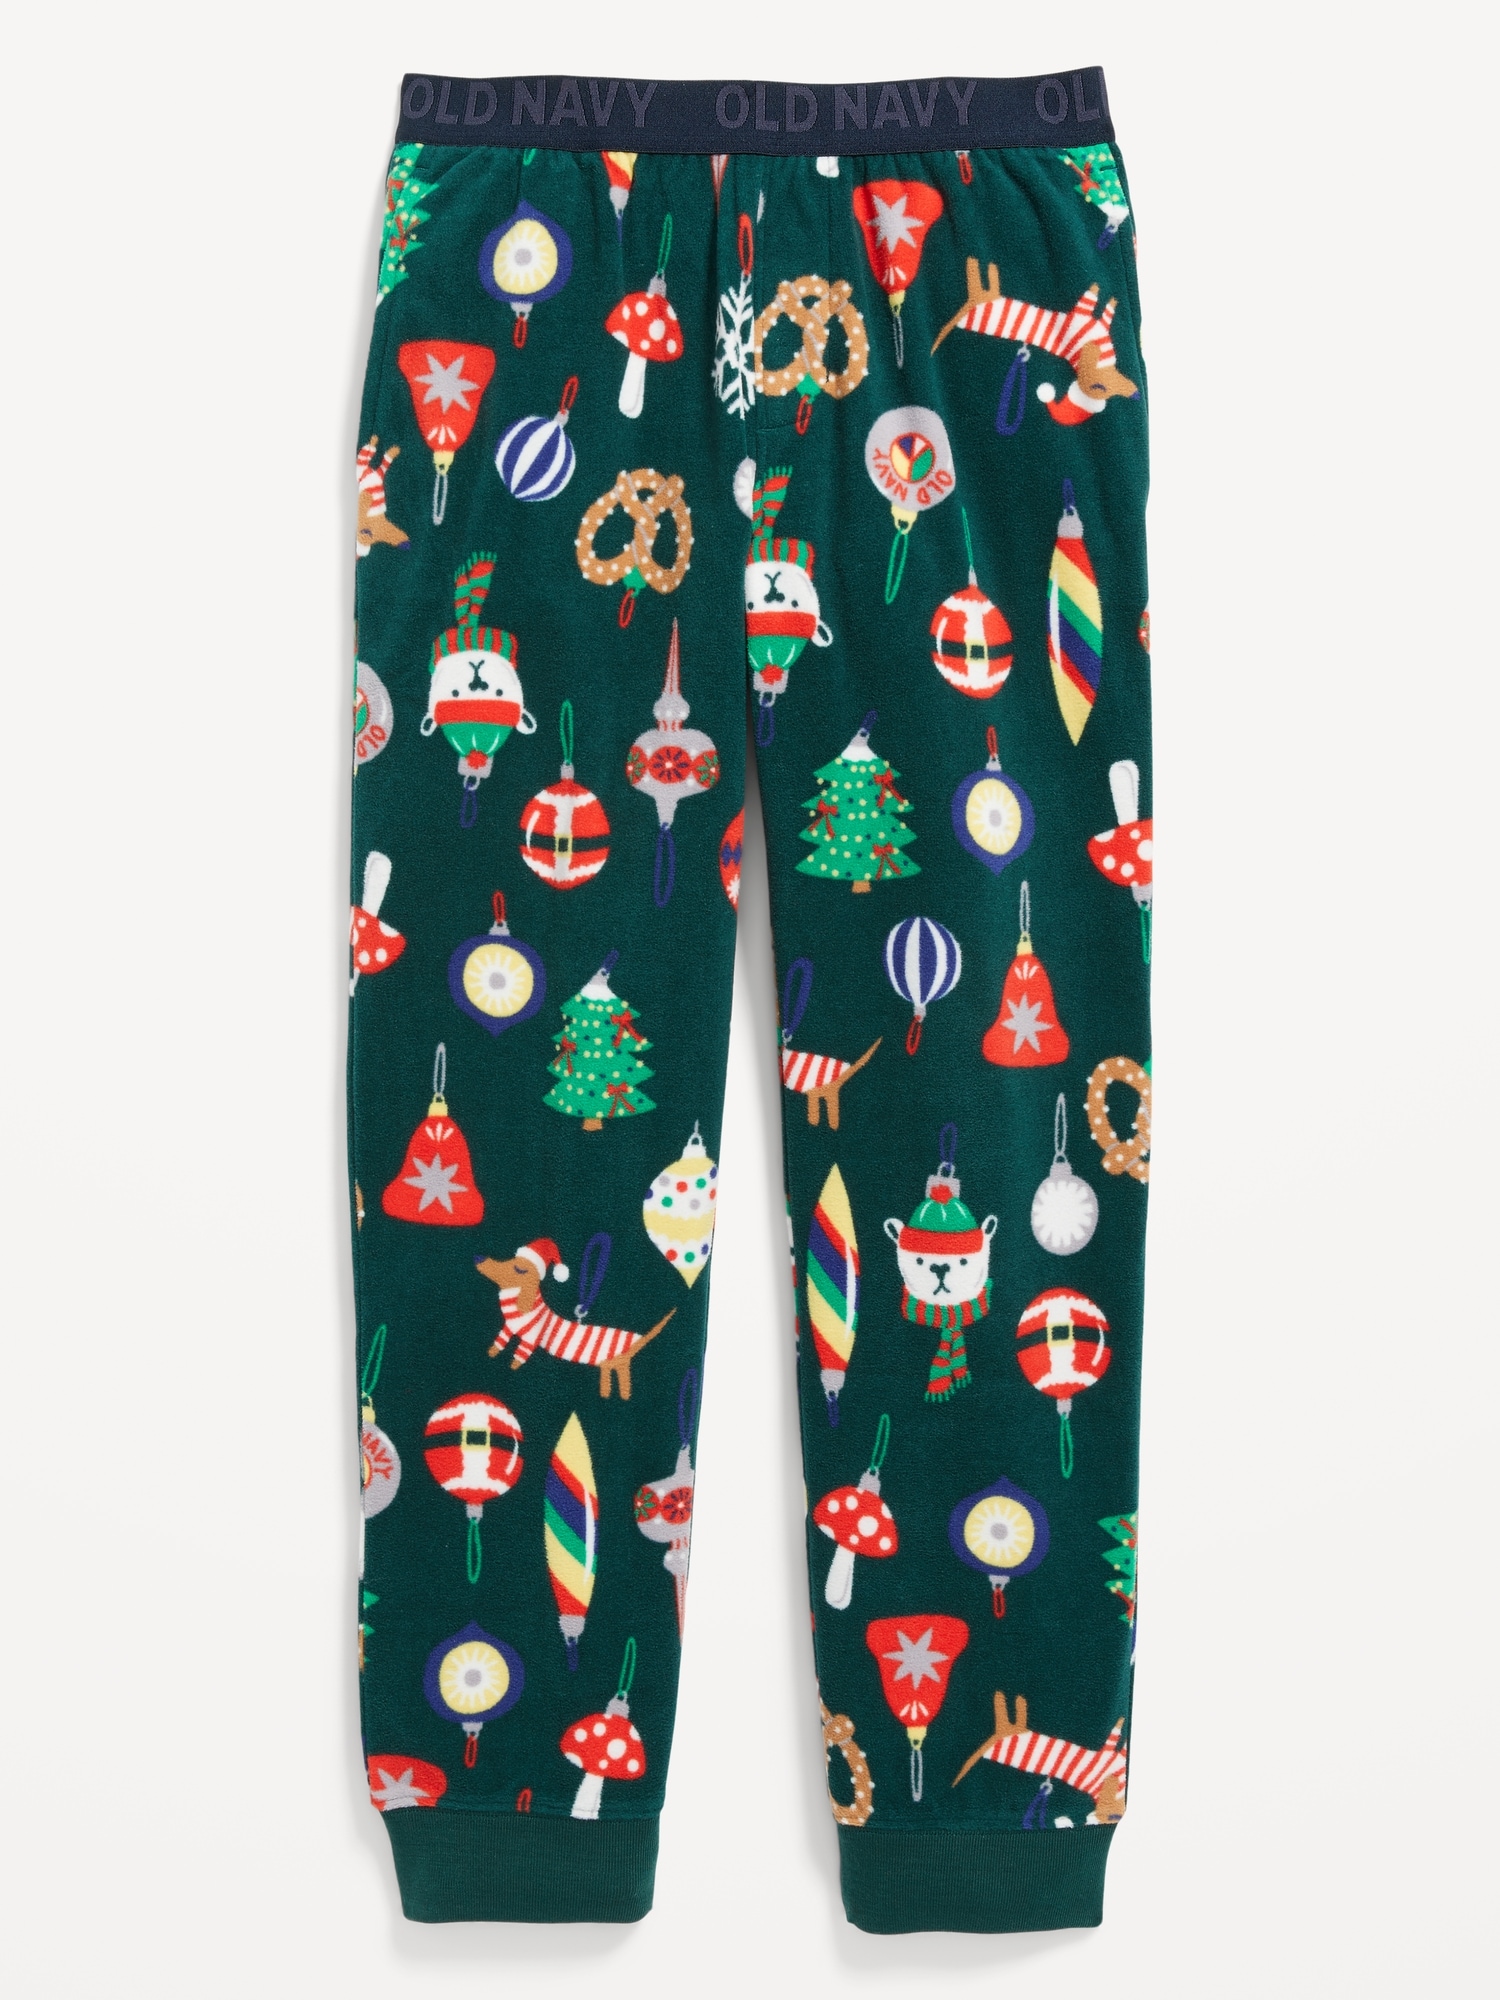 Patterned Microfleece Pajama Jogger Pants for Boys | Old Navy